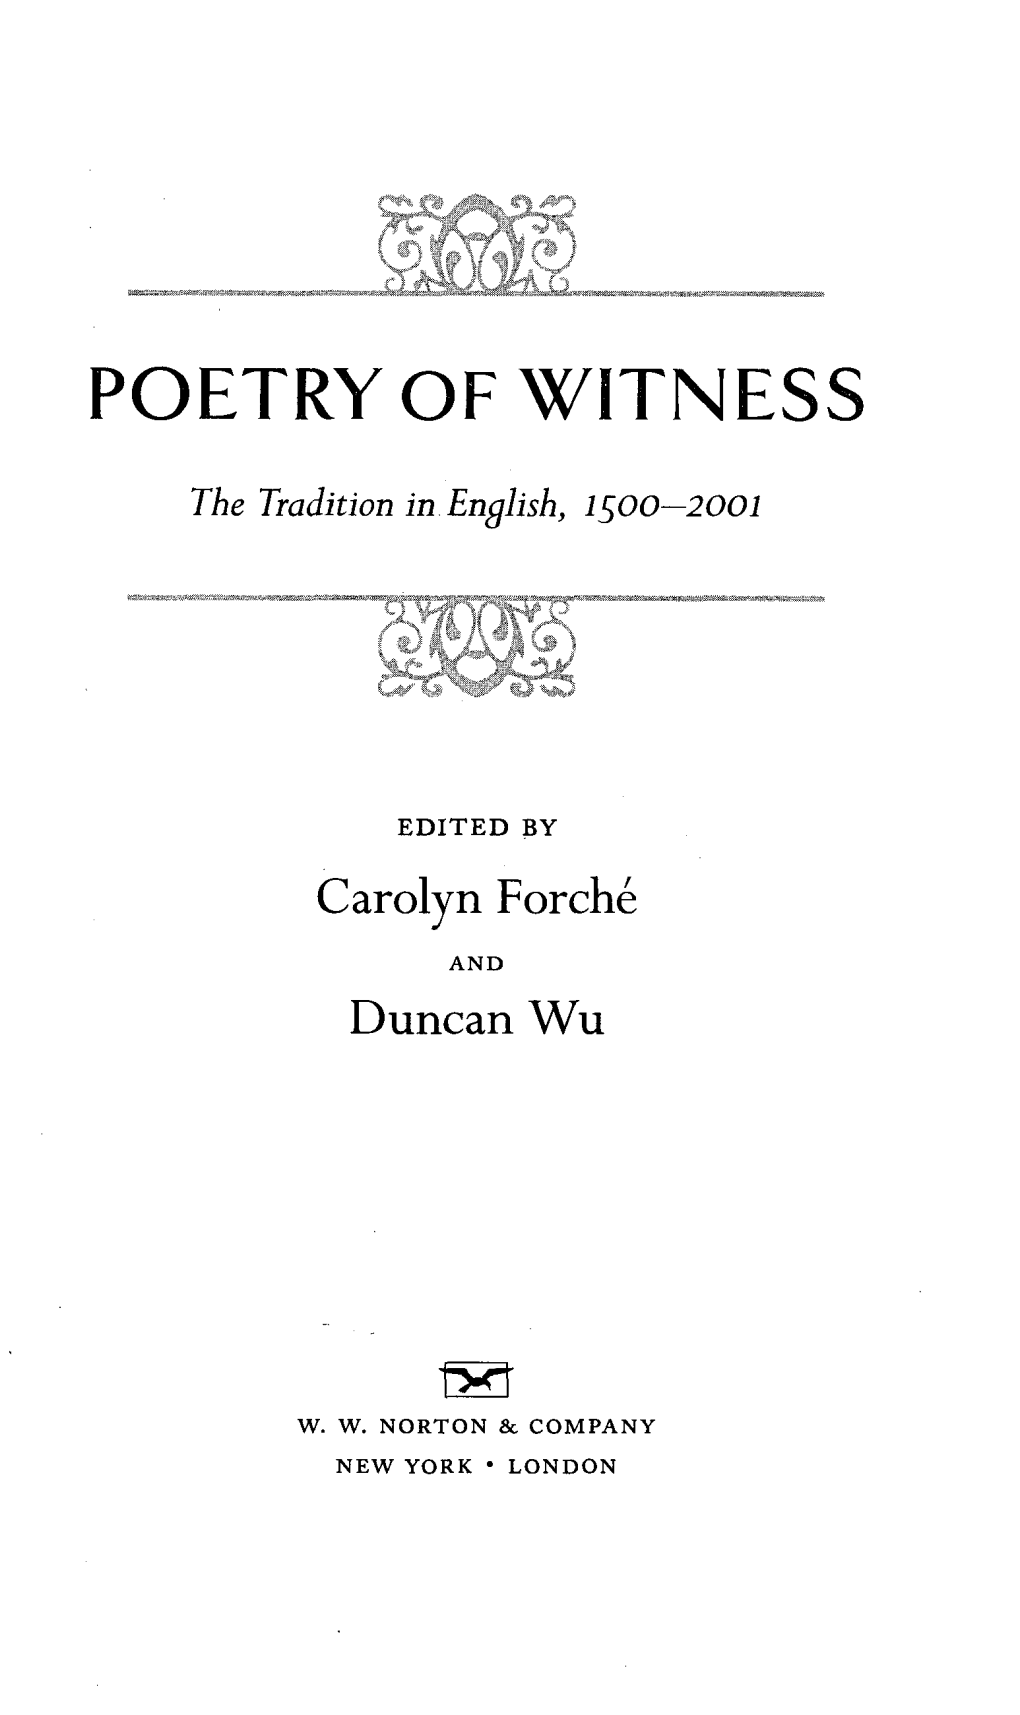 Poetry of Witness